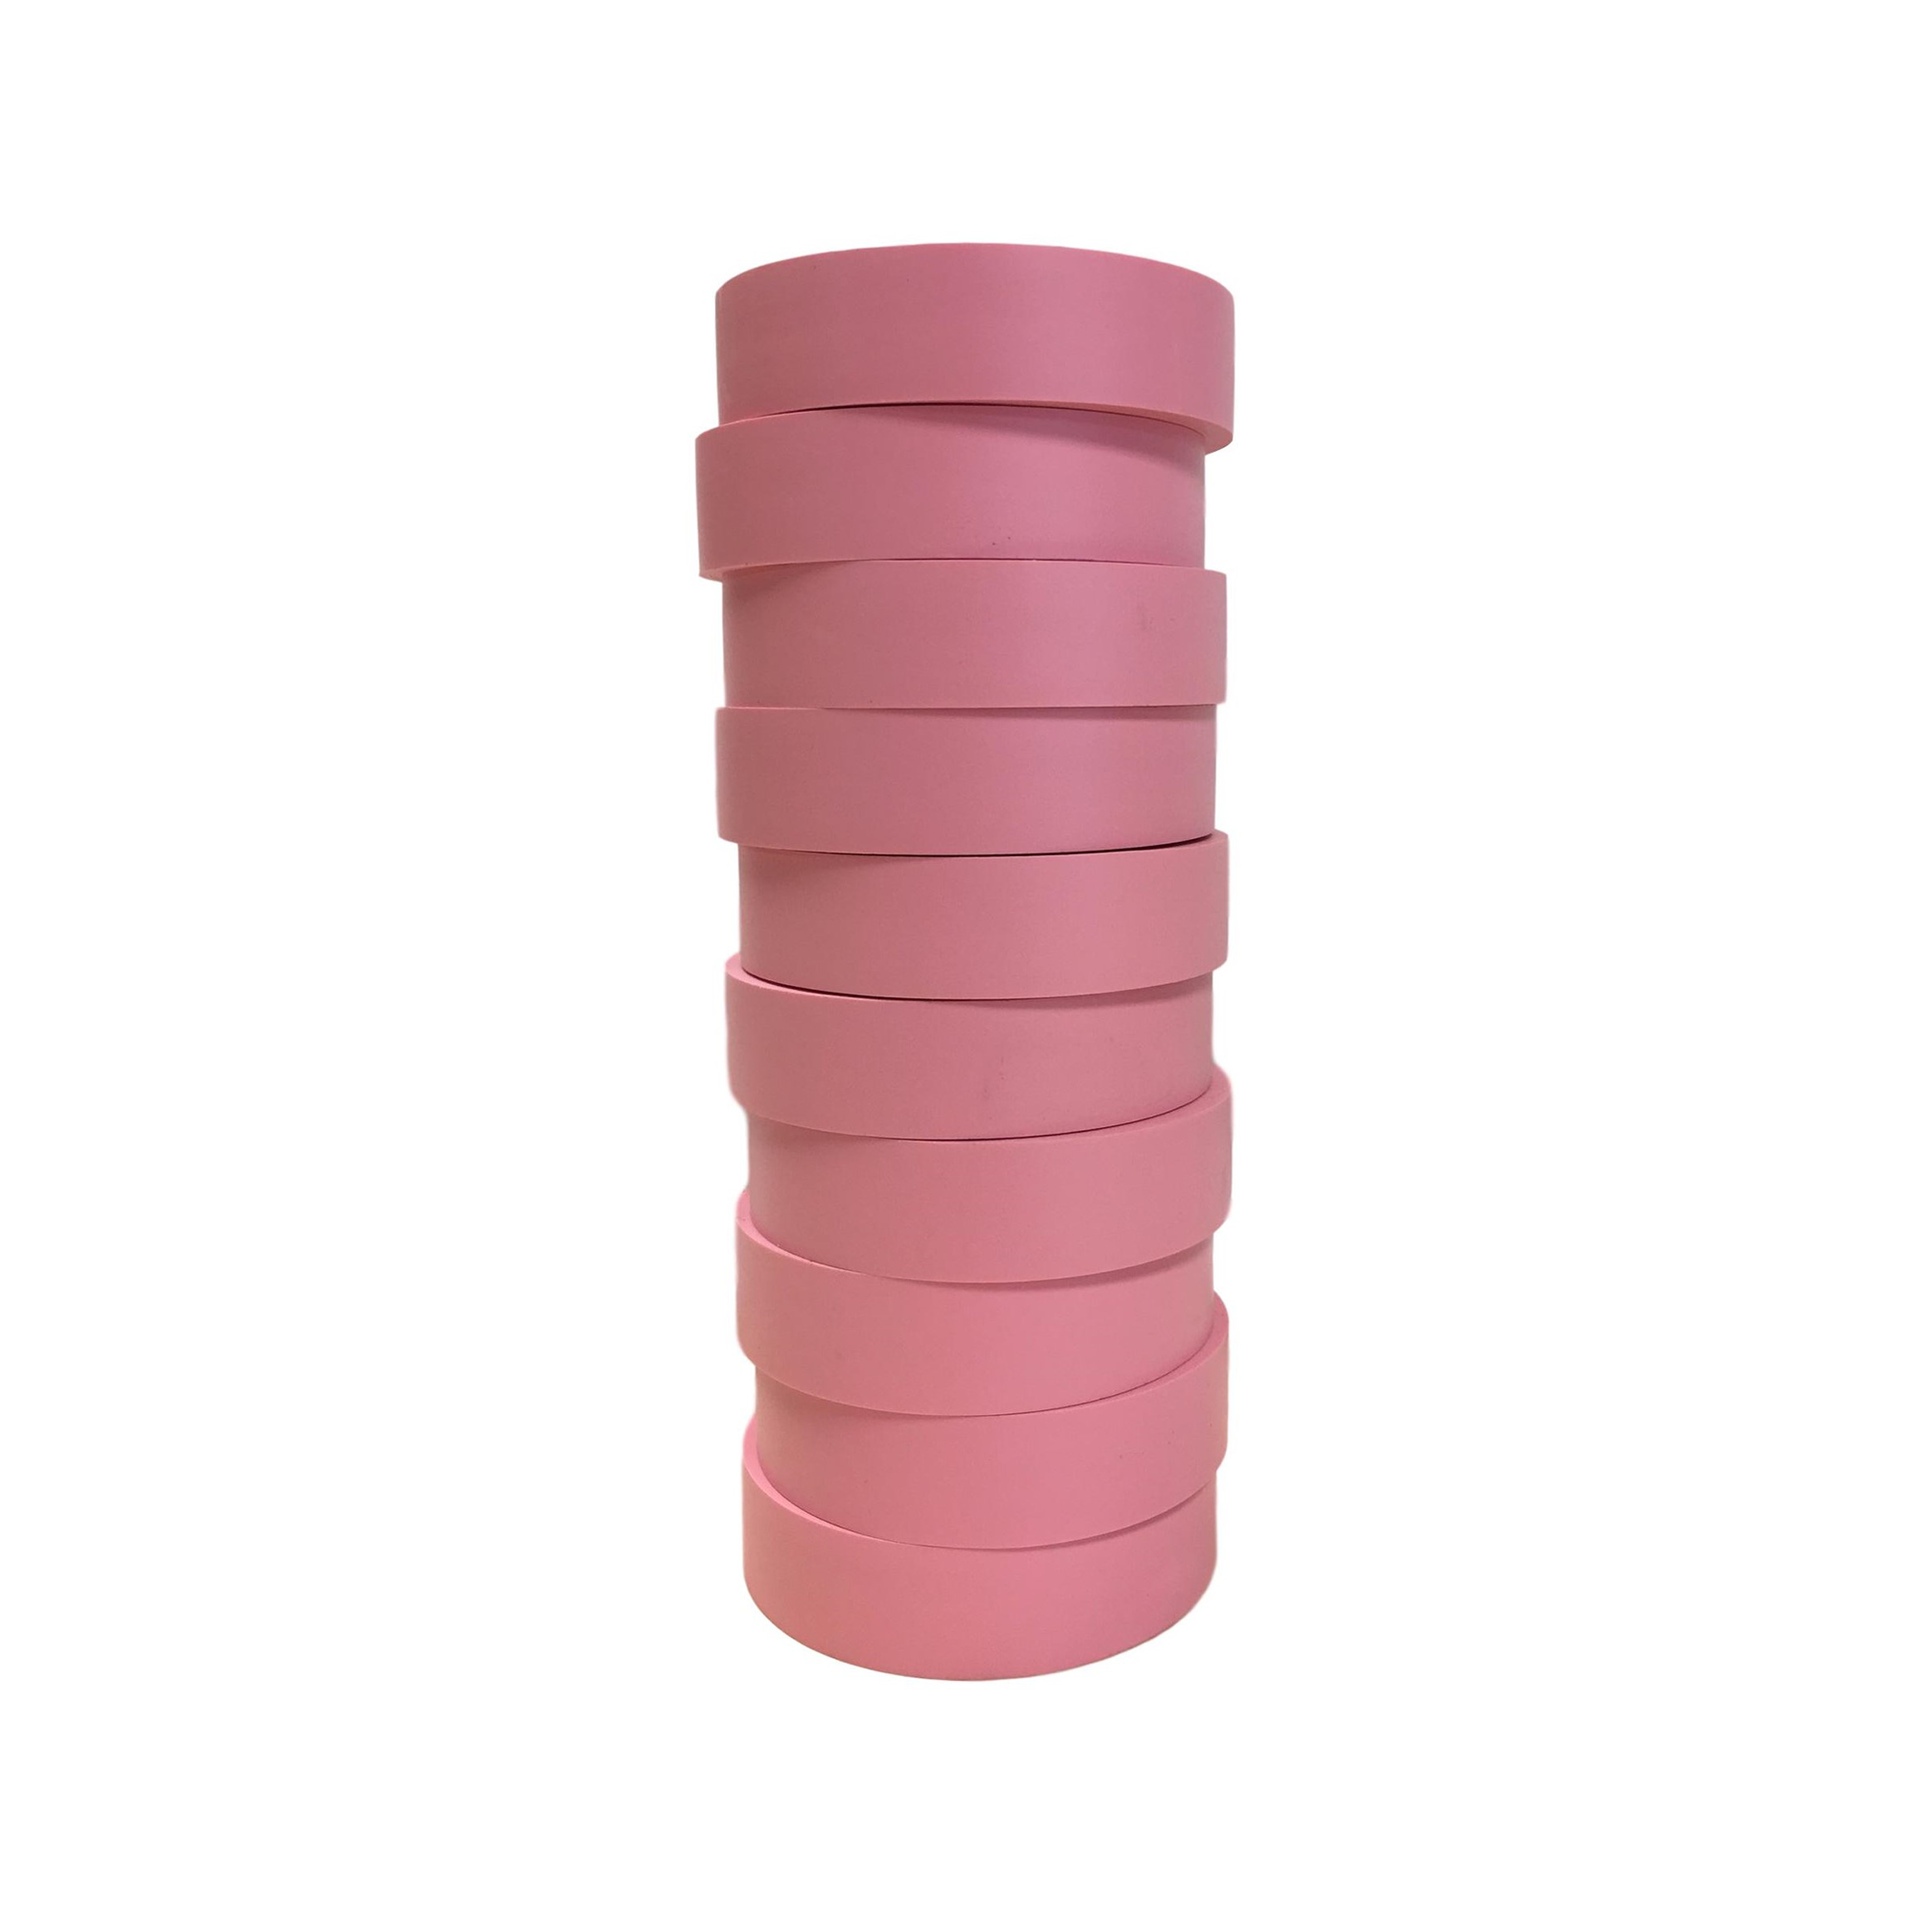 MAT Professional Grade Electrical Tape Pink - 3/4 inch x 66ft. -  Waterproof, Flame Retardant, & Strong Rubber Based Adhesive for Use At No  More Than